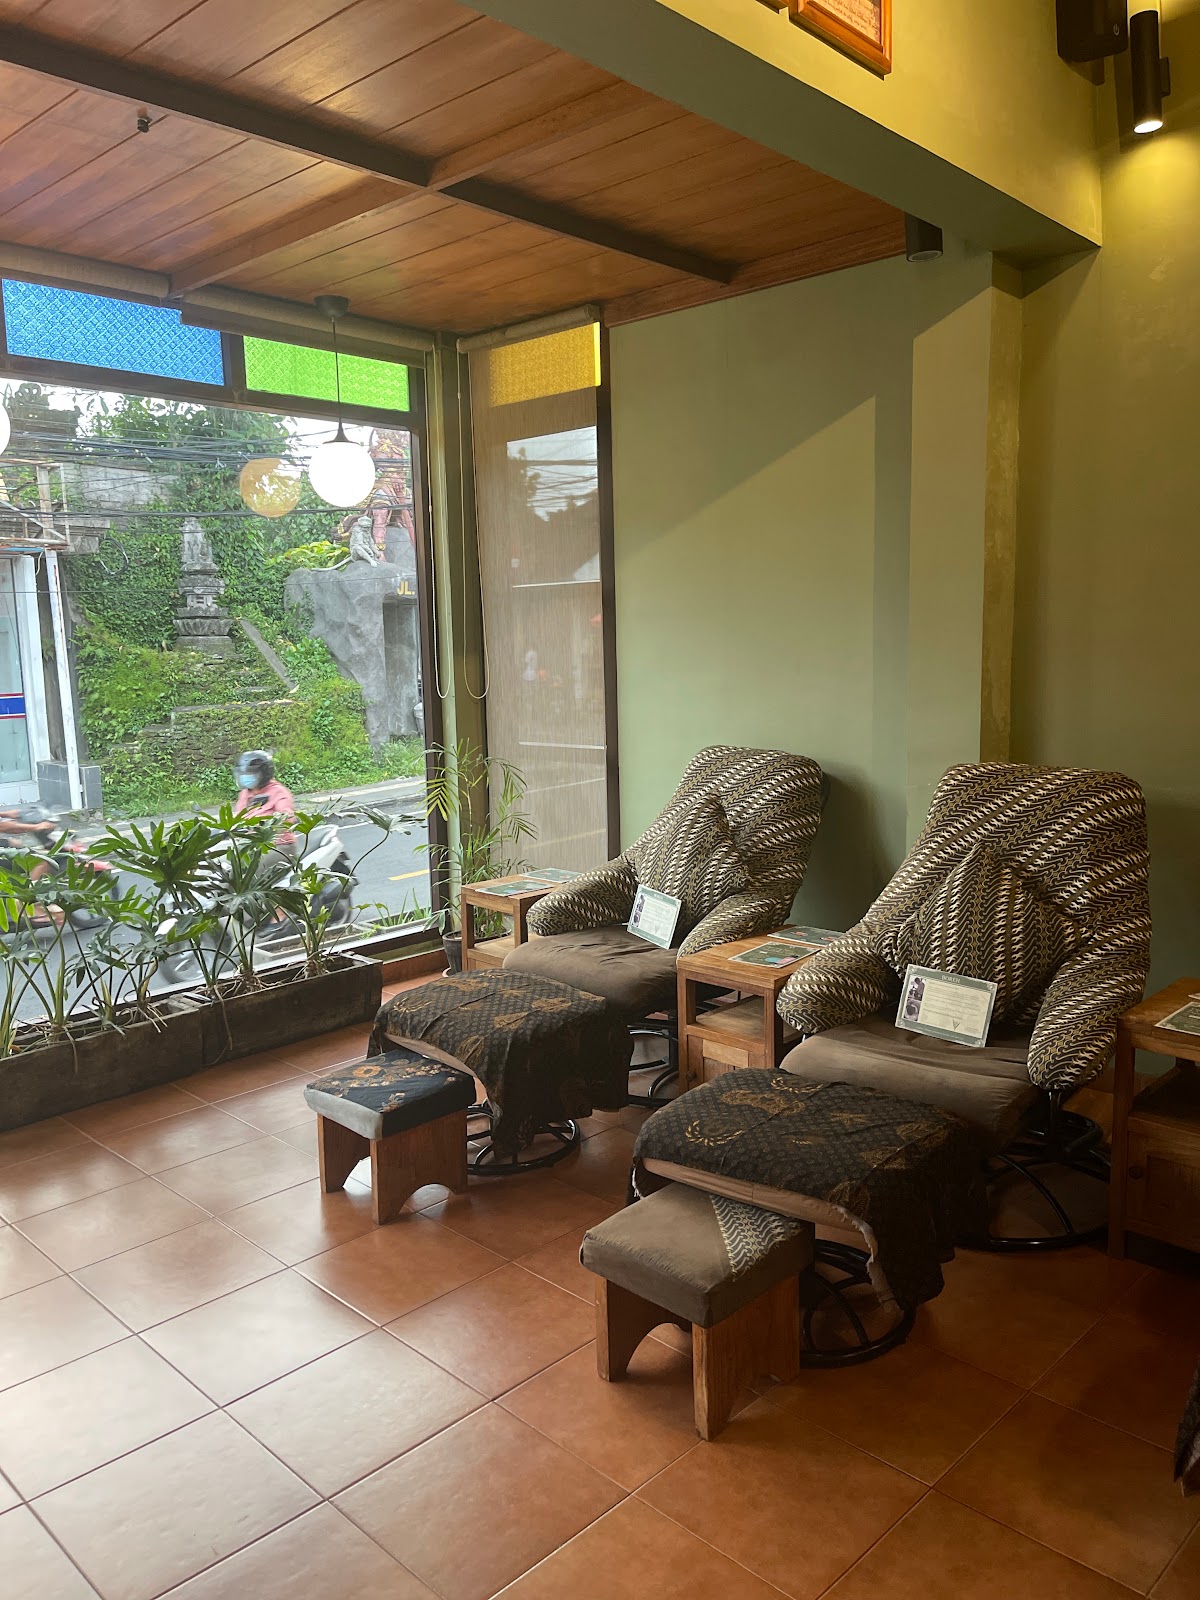 NUSA THERAPY - Traditional Massage Center